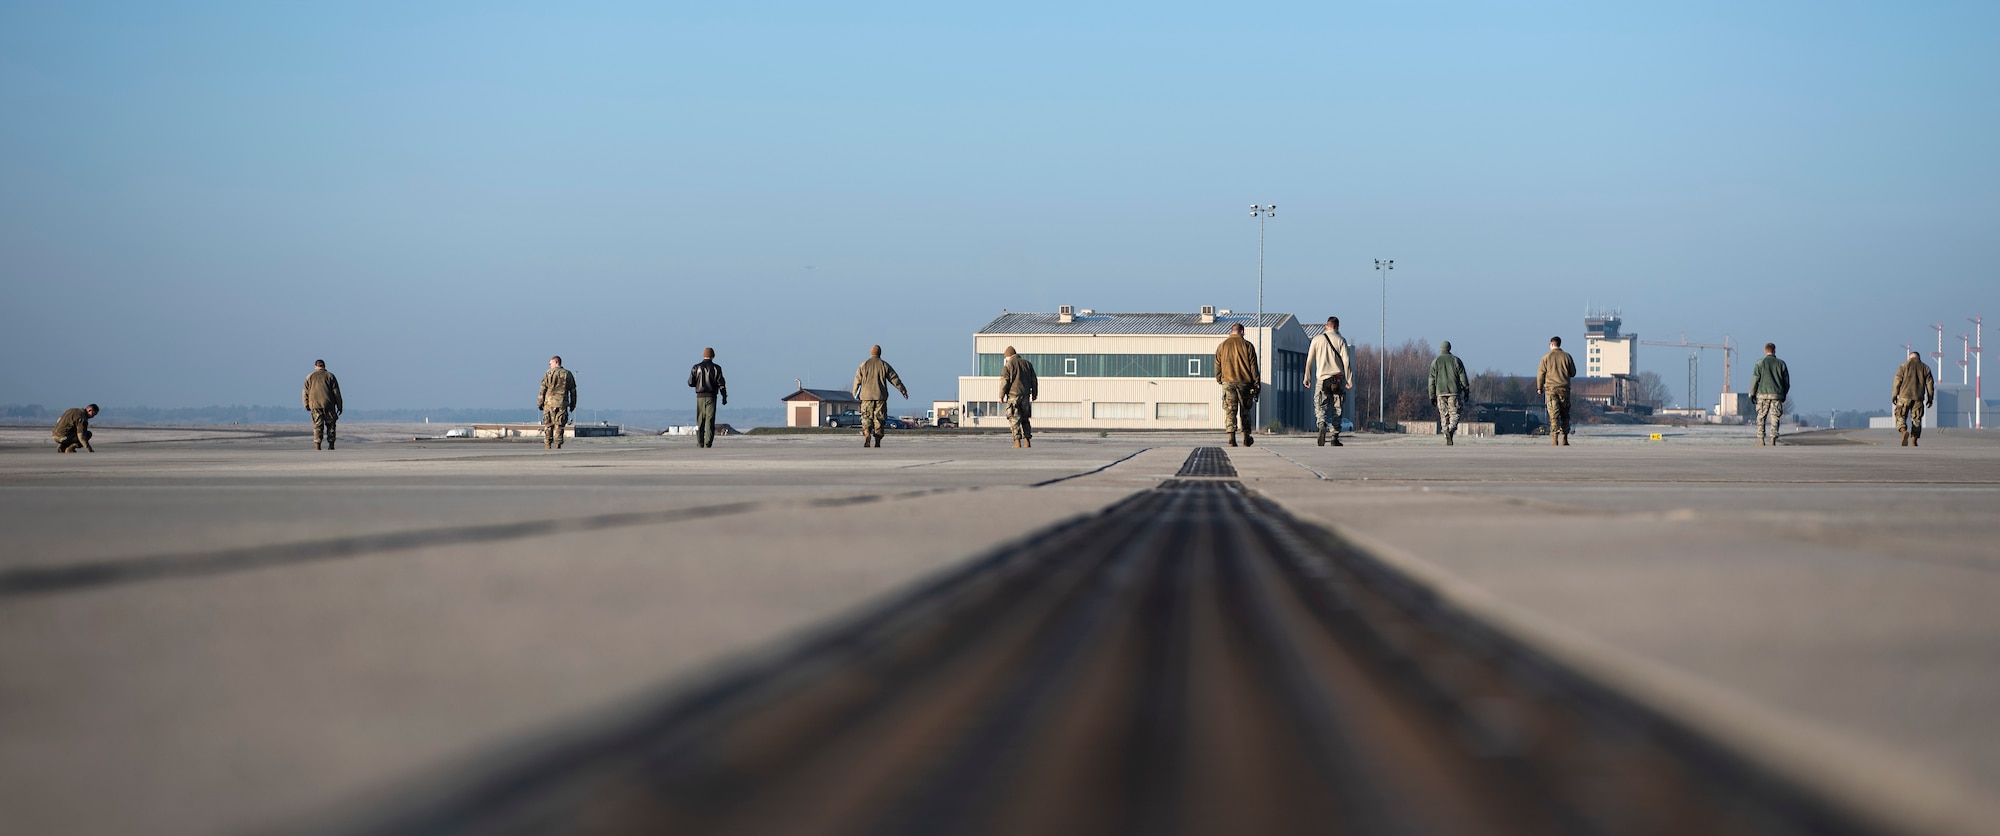 U.S. Air Force Airmen from the 52nd Fighter Wing and 86th Airlift Wing perform a foreign object debris walk on the flightline at Ramstein Air Base, Germany, Jan. 22, 2020. 52nd FW Airmen forward deployed to Ramstein to participate in an Agile Combat Employment exercise to practice moving forces fluidly in Europe and ensure readiness for any possible threat. FOD walks ensure there are no items on the flightline that could damage an aircraft. (U.S. Air Force photo by Airman 1st Class Valerie Seelye)